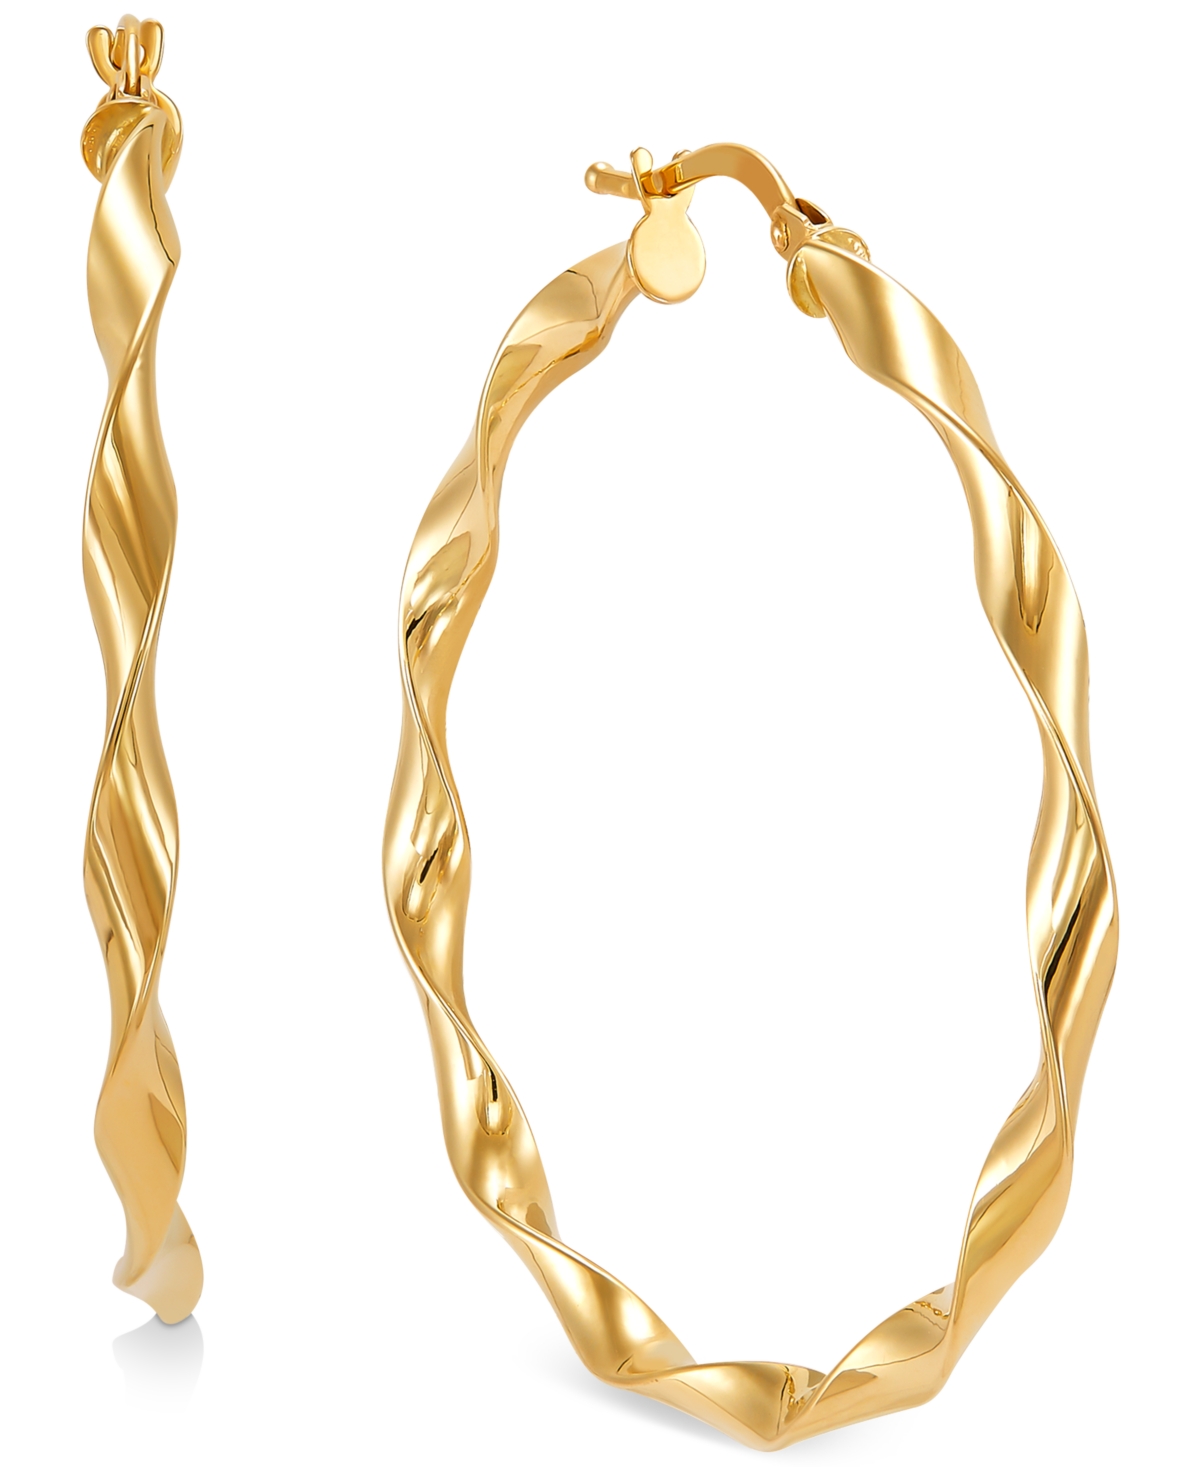 Twisted Round Hoop Earrings in 10k Gold, 40mm - Gold